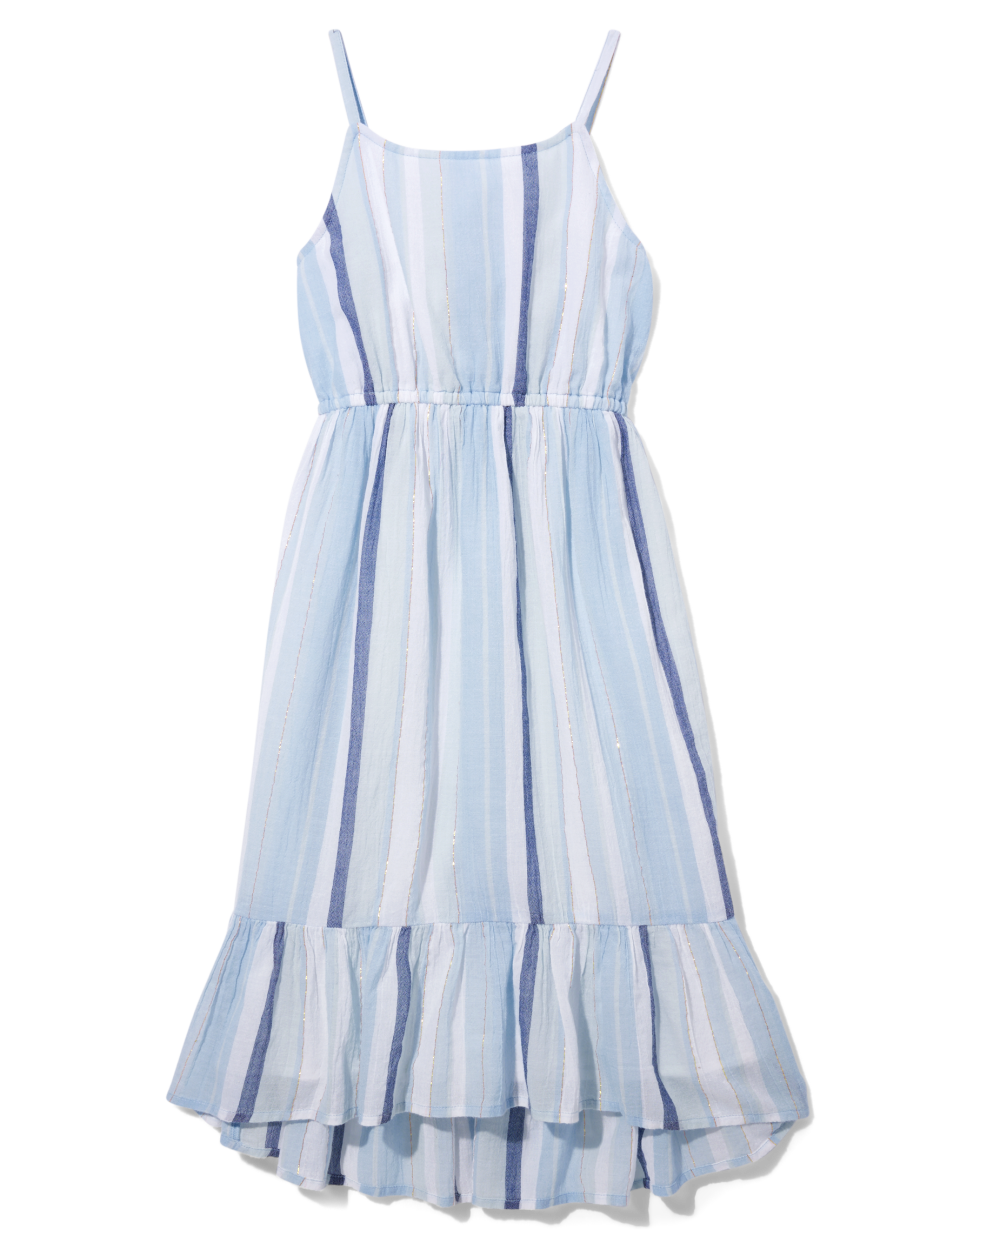 Girls Tiered Striped Print Sleeveless Spaghetti Strap Round Neck Smocked Above the Knee Dress With Ruffles